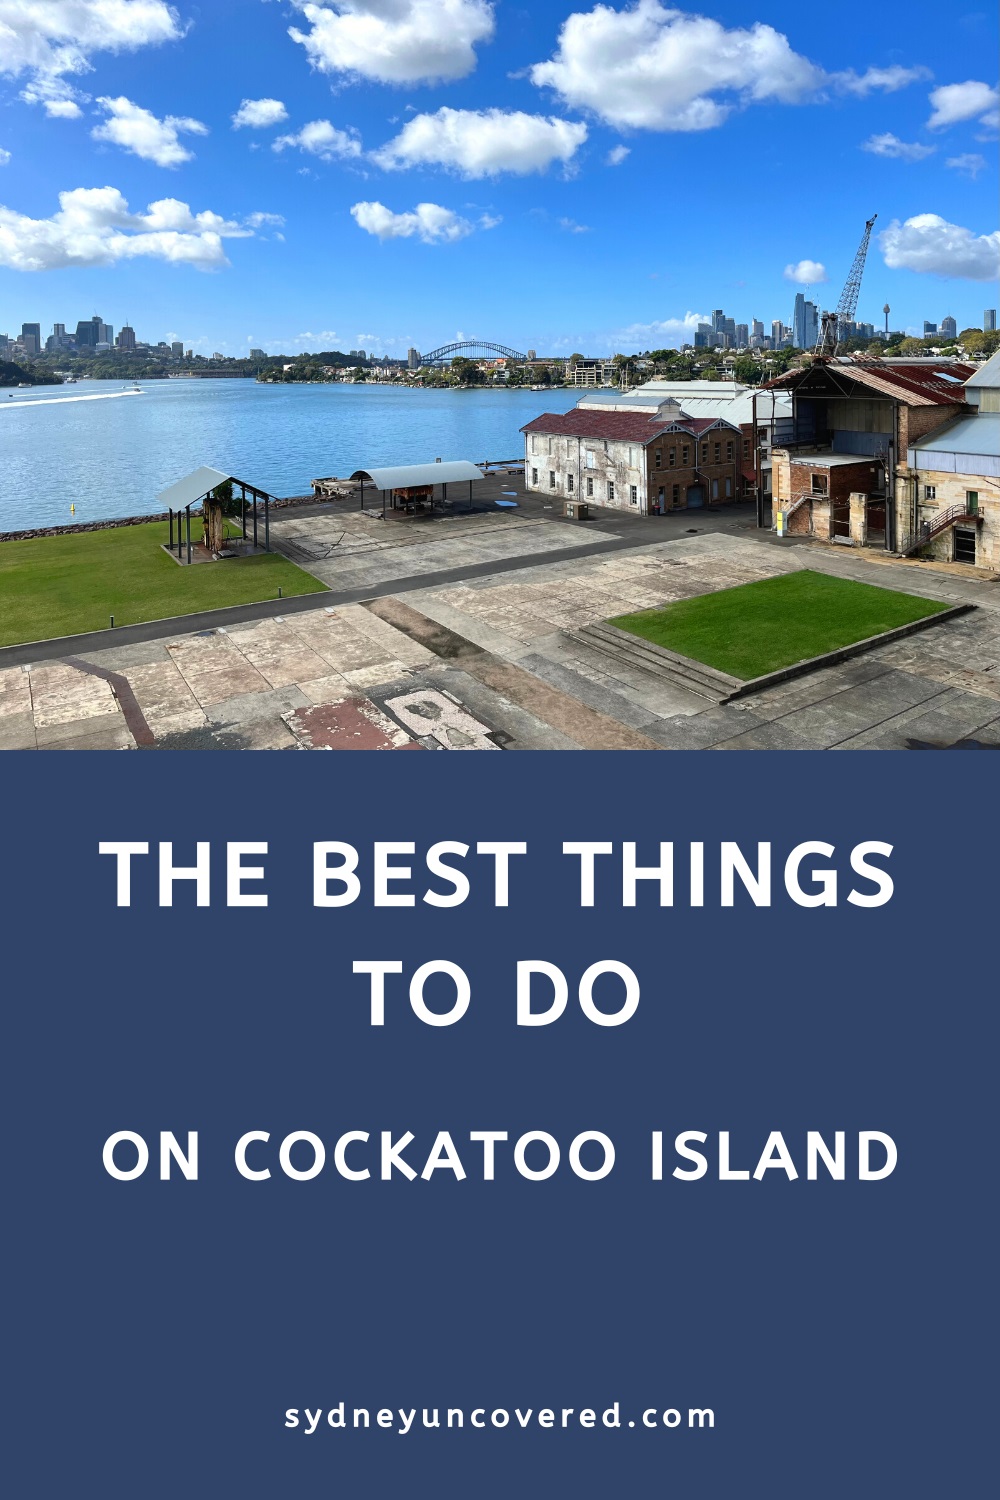 Best things to do on Cockatoo Island